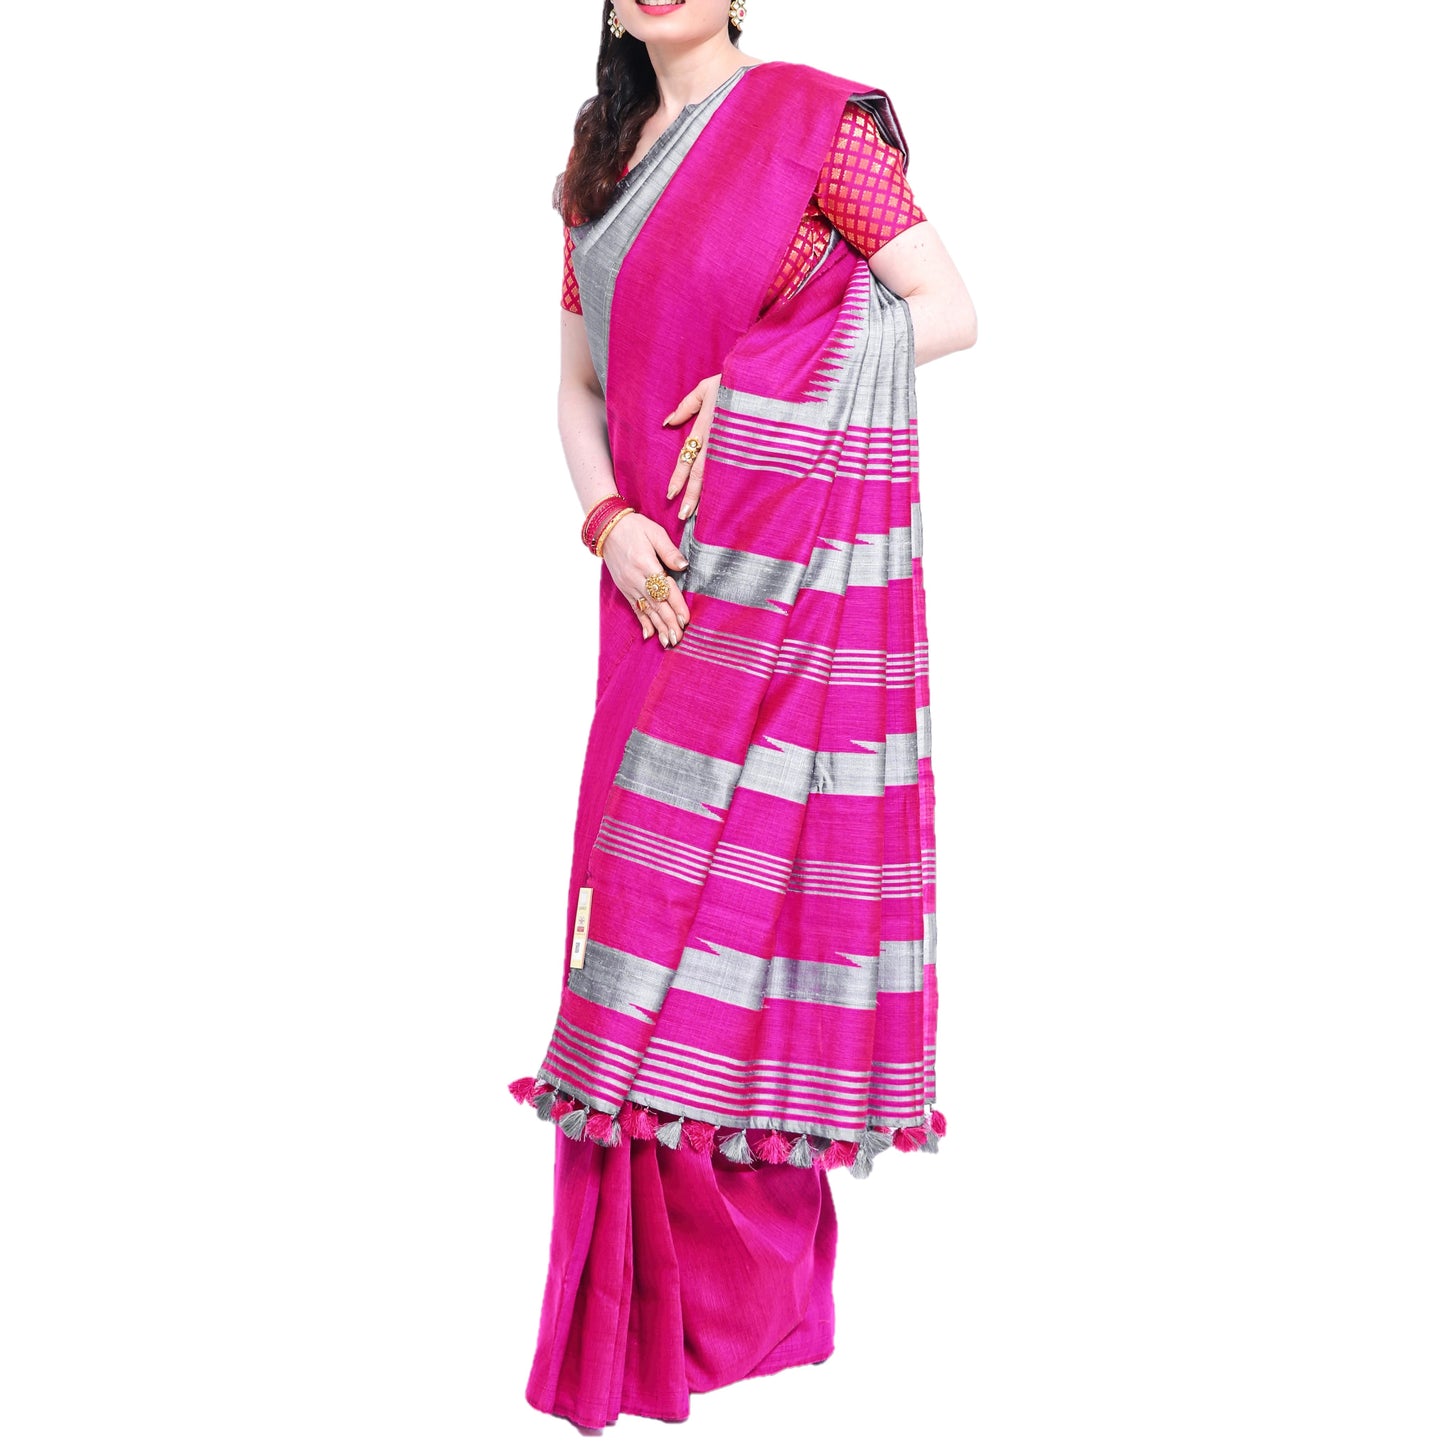 Pure Handloom Tussar Silk Saree - Silver Grey and Pink with Temple Border